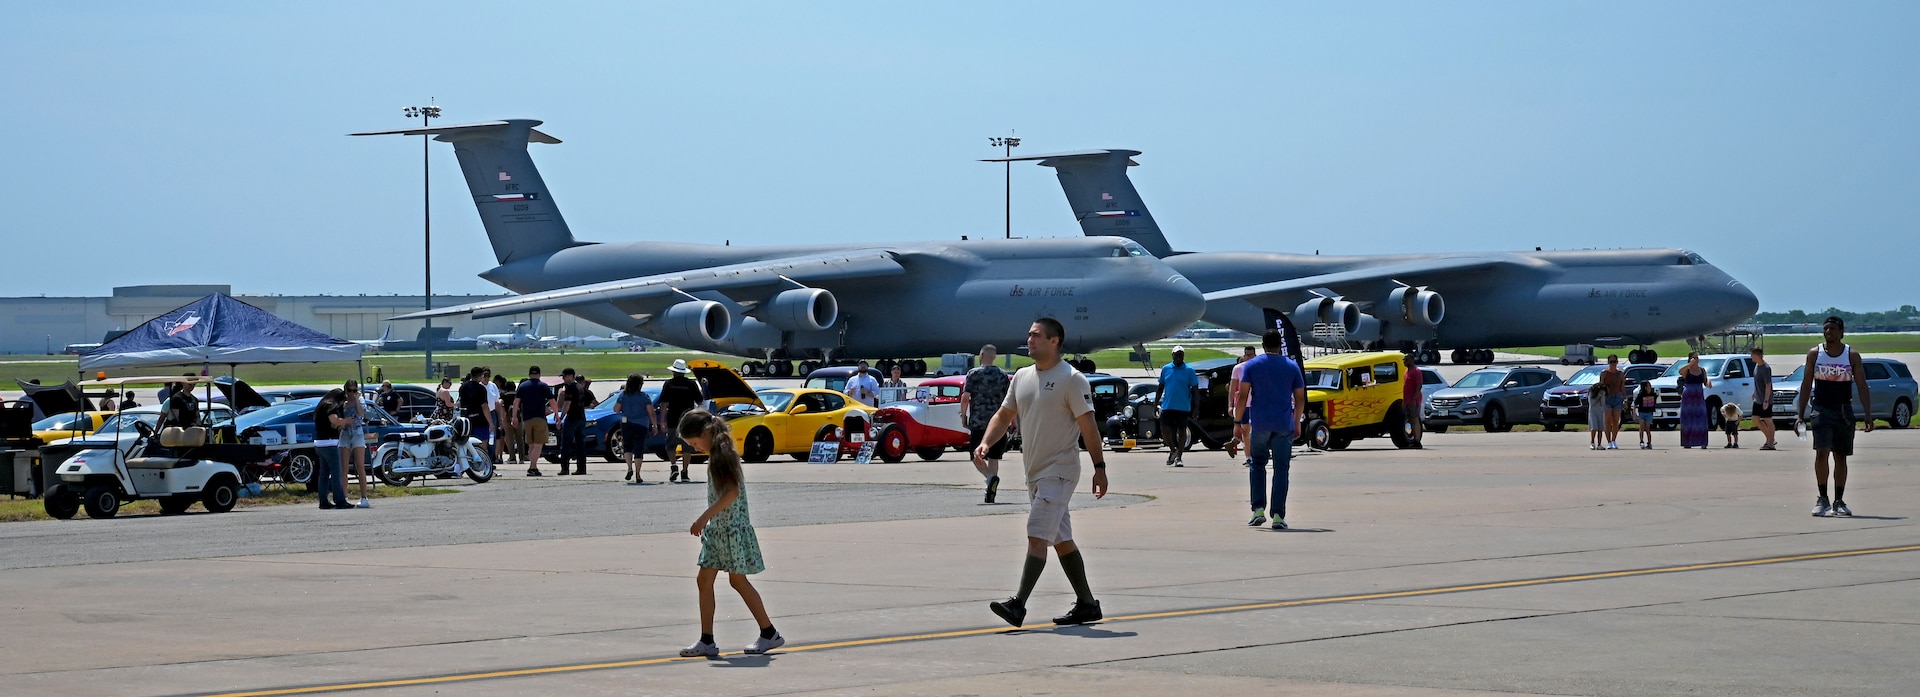 The 433rd Airlift Wing hosts its first Family Day since 2019 during the unit training assembly May 15, 2022, at Joint Base San Antonio-Lackland, Texas. Reserve Citizen Airmen and their families were able to view a car show, a C-5M Super Galaxy display, eat free food and participate in other events. (U.S. Air Force photo by Master Sgt. Samantha Mathison)